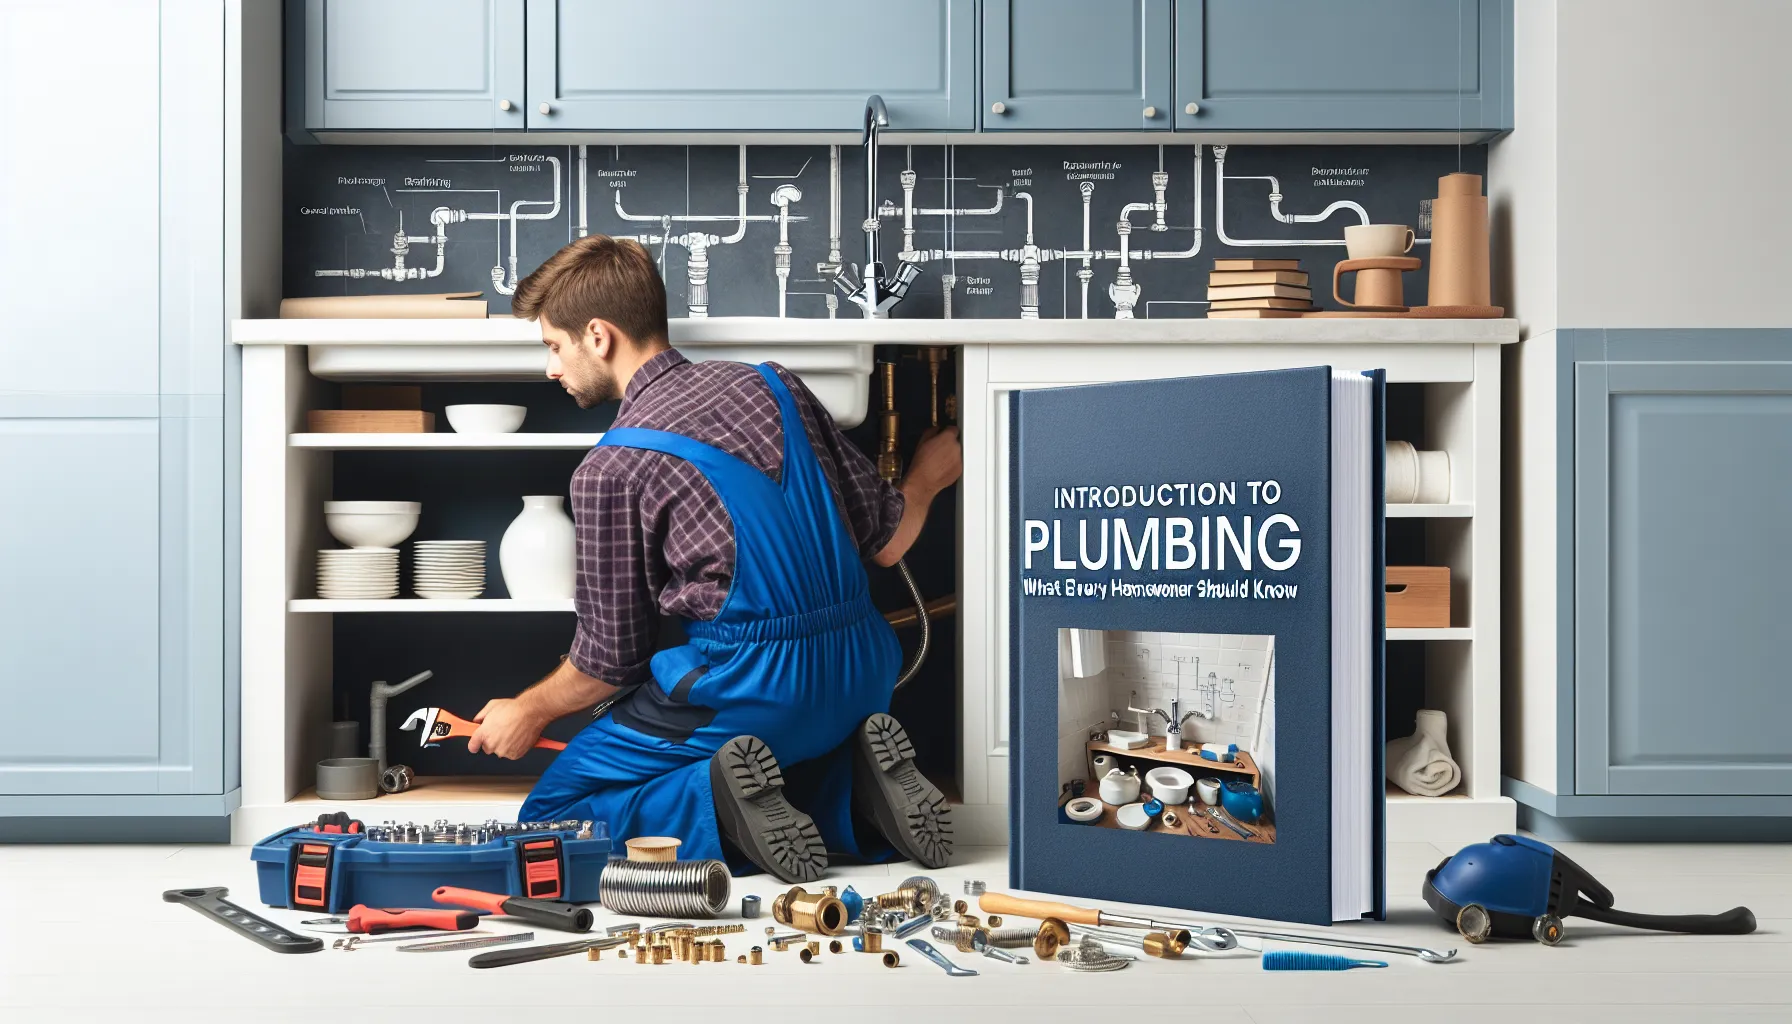 Introduction to Plumbing: What Every Homeowner Should Know